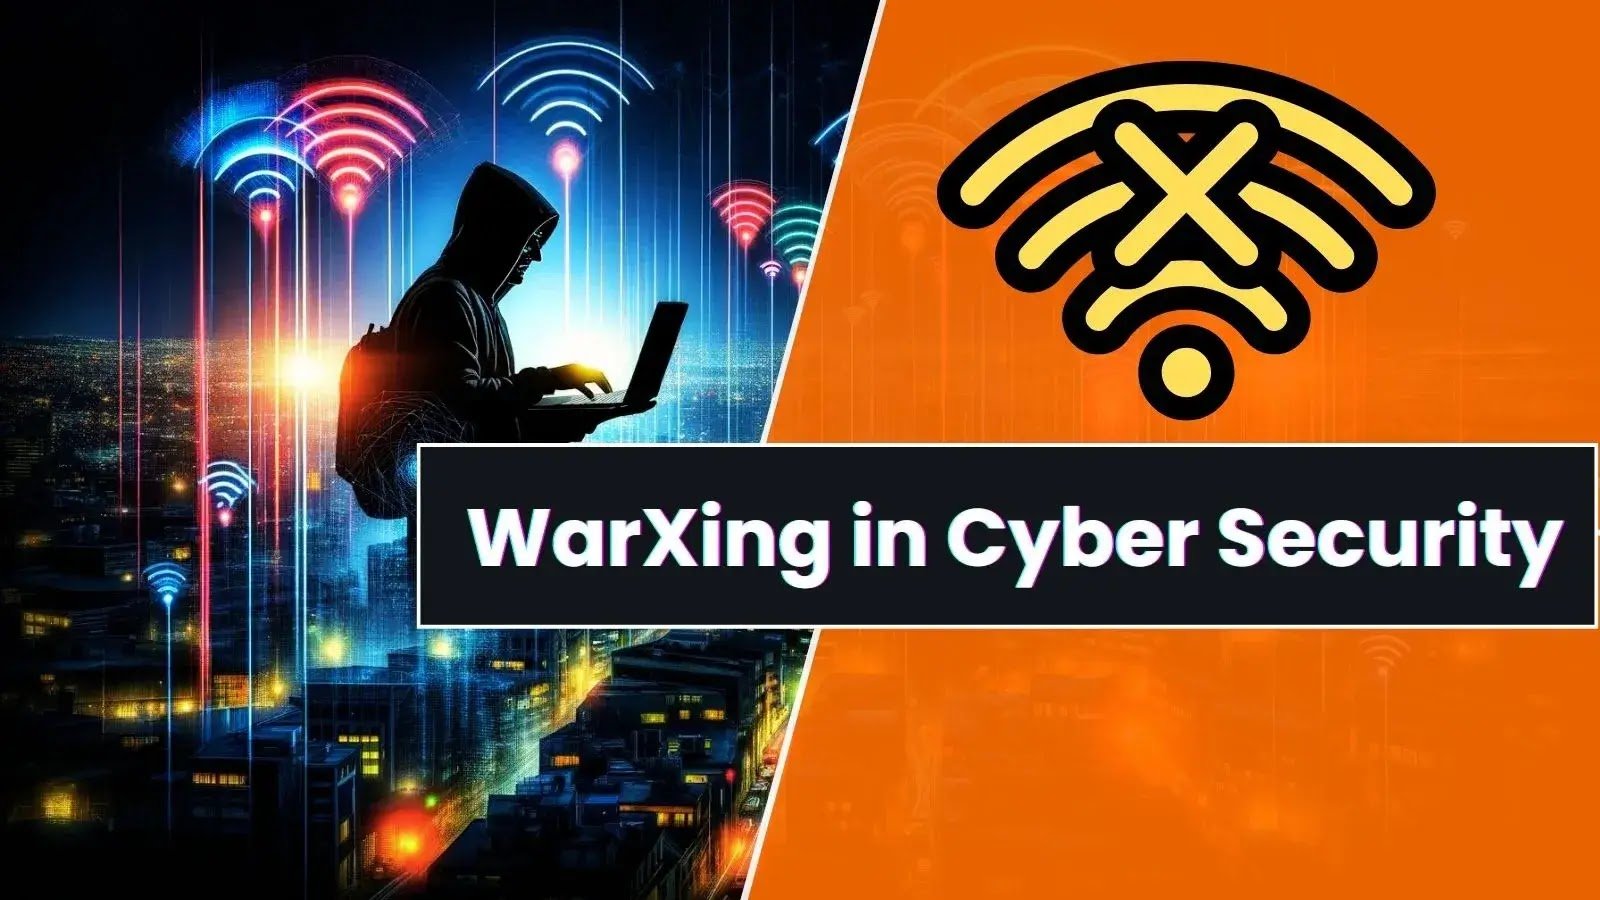 What is WarXing in Cyber Security? What are the Benefits?